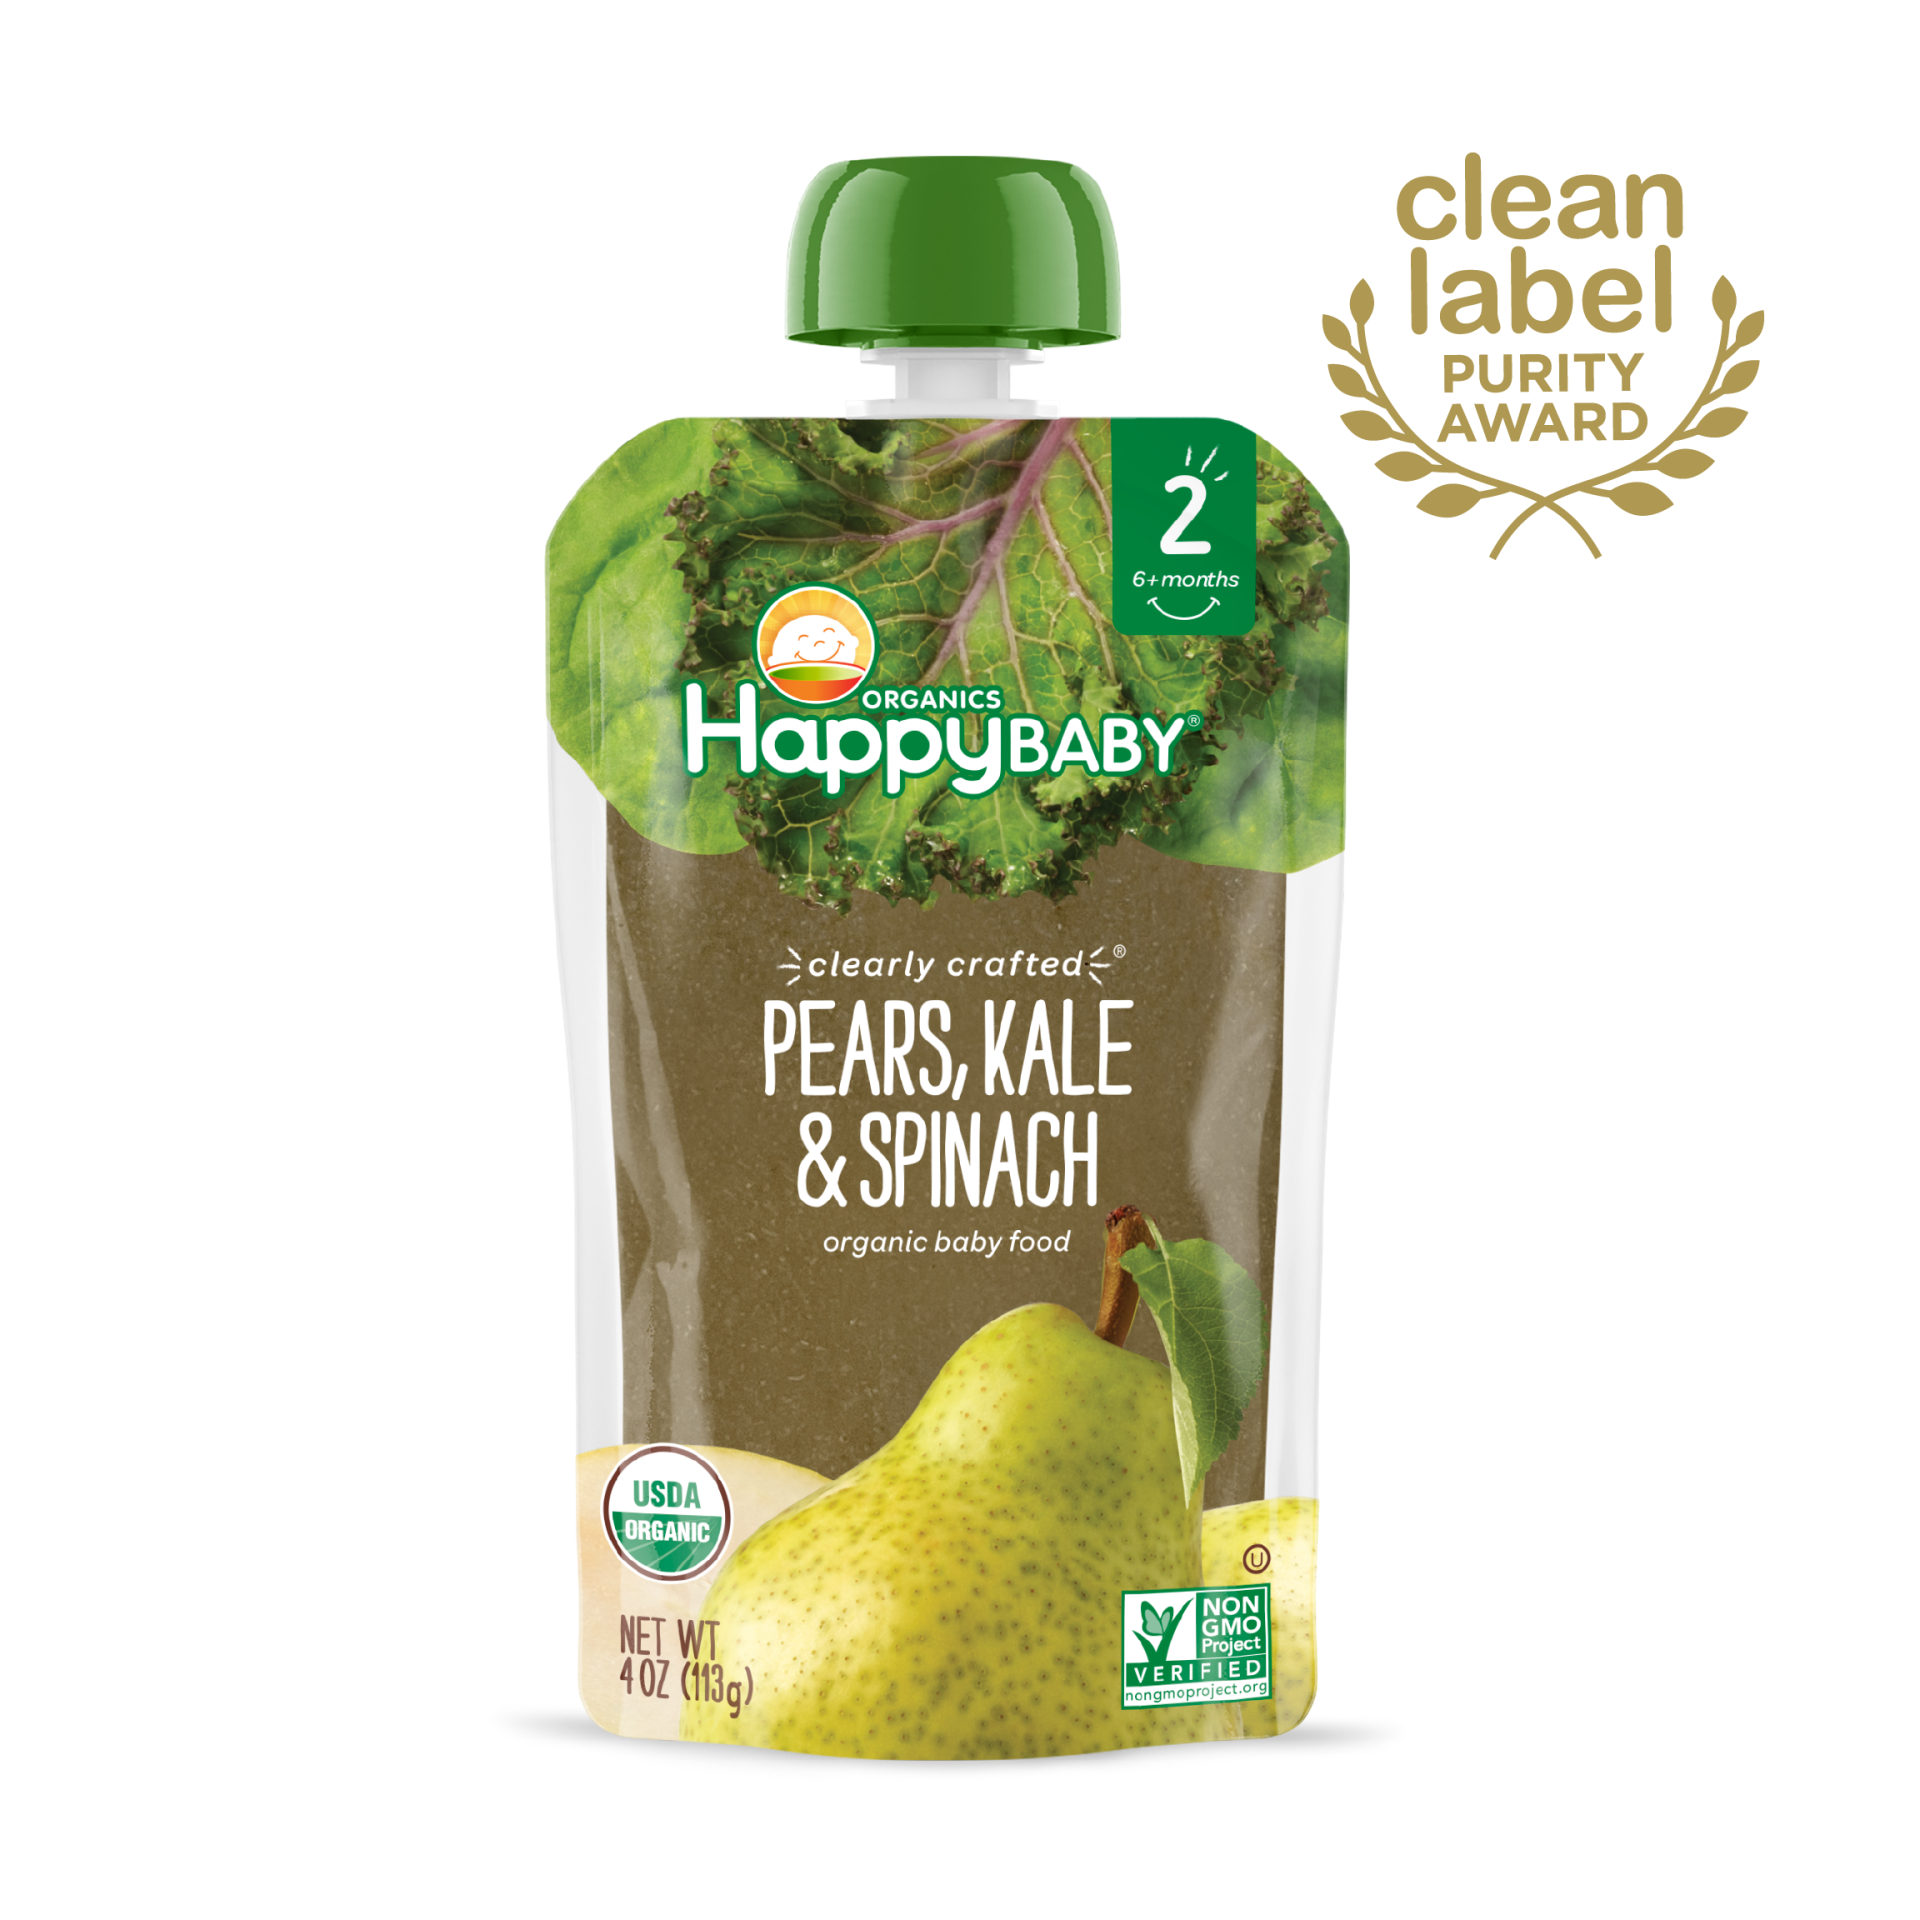 Happy Baby S2 - Clearly Crafted Pears Kale & Spinach 4Oz pouch 16 units per case 4.0 oz